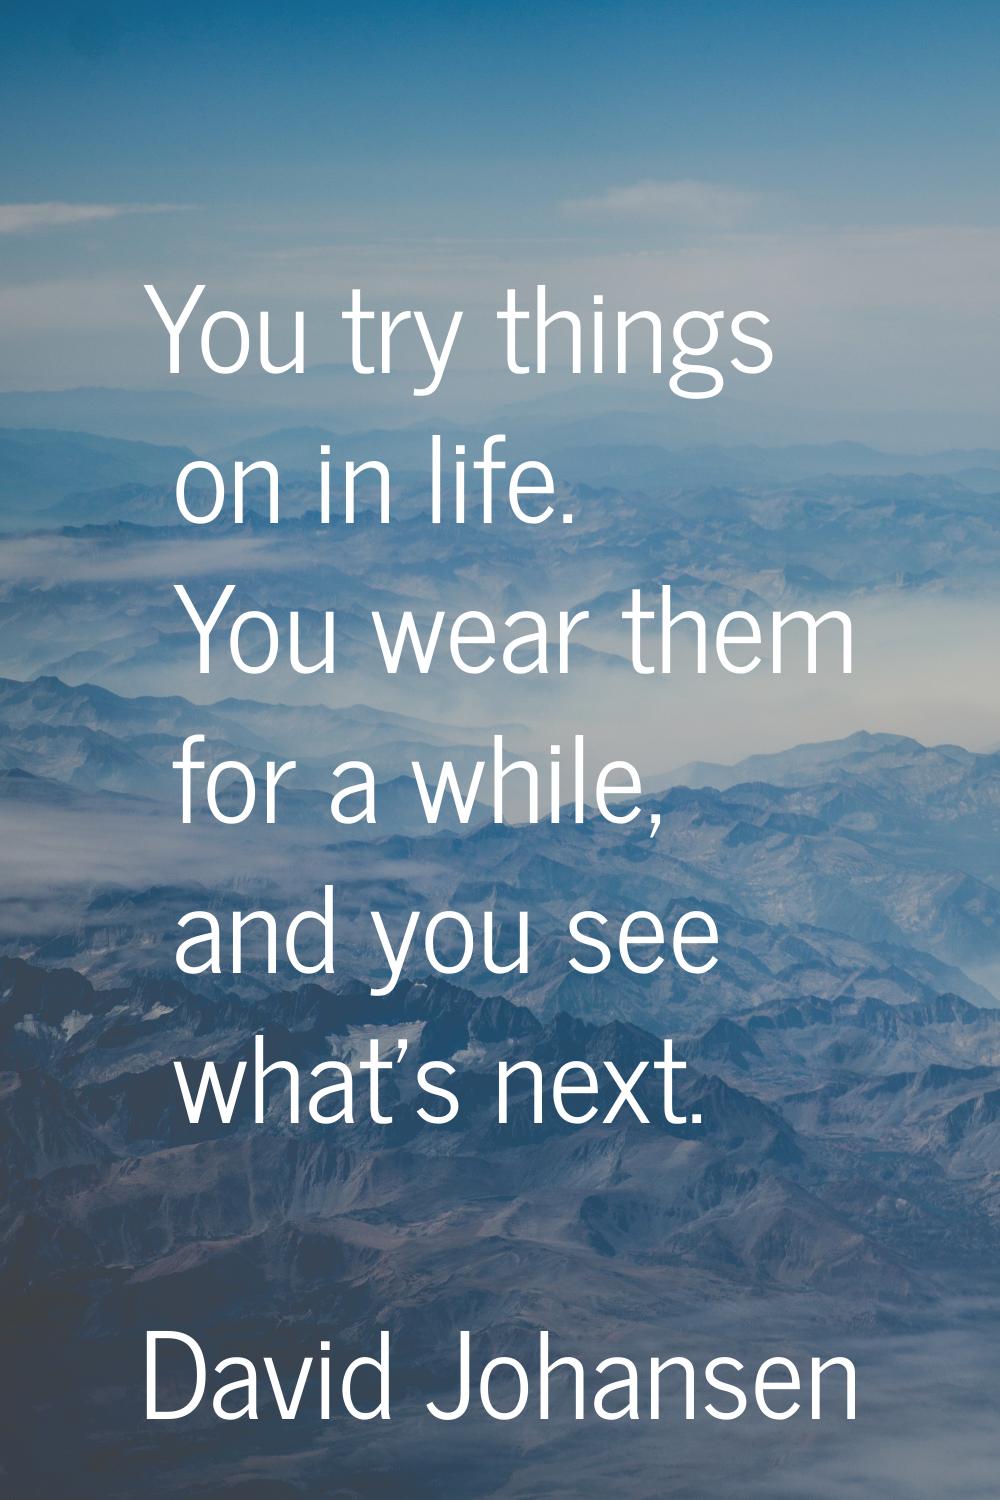 You try things on in life. You wear them for a while, and you see what's next.